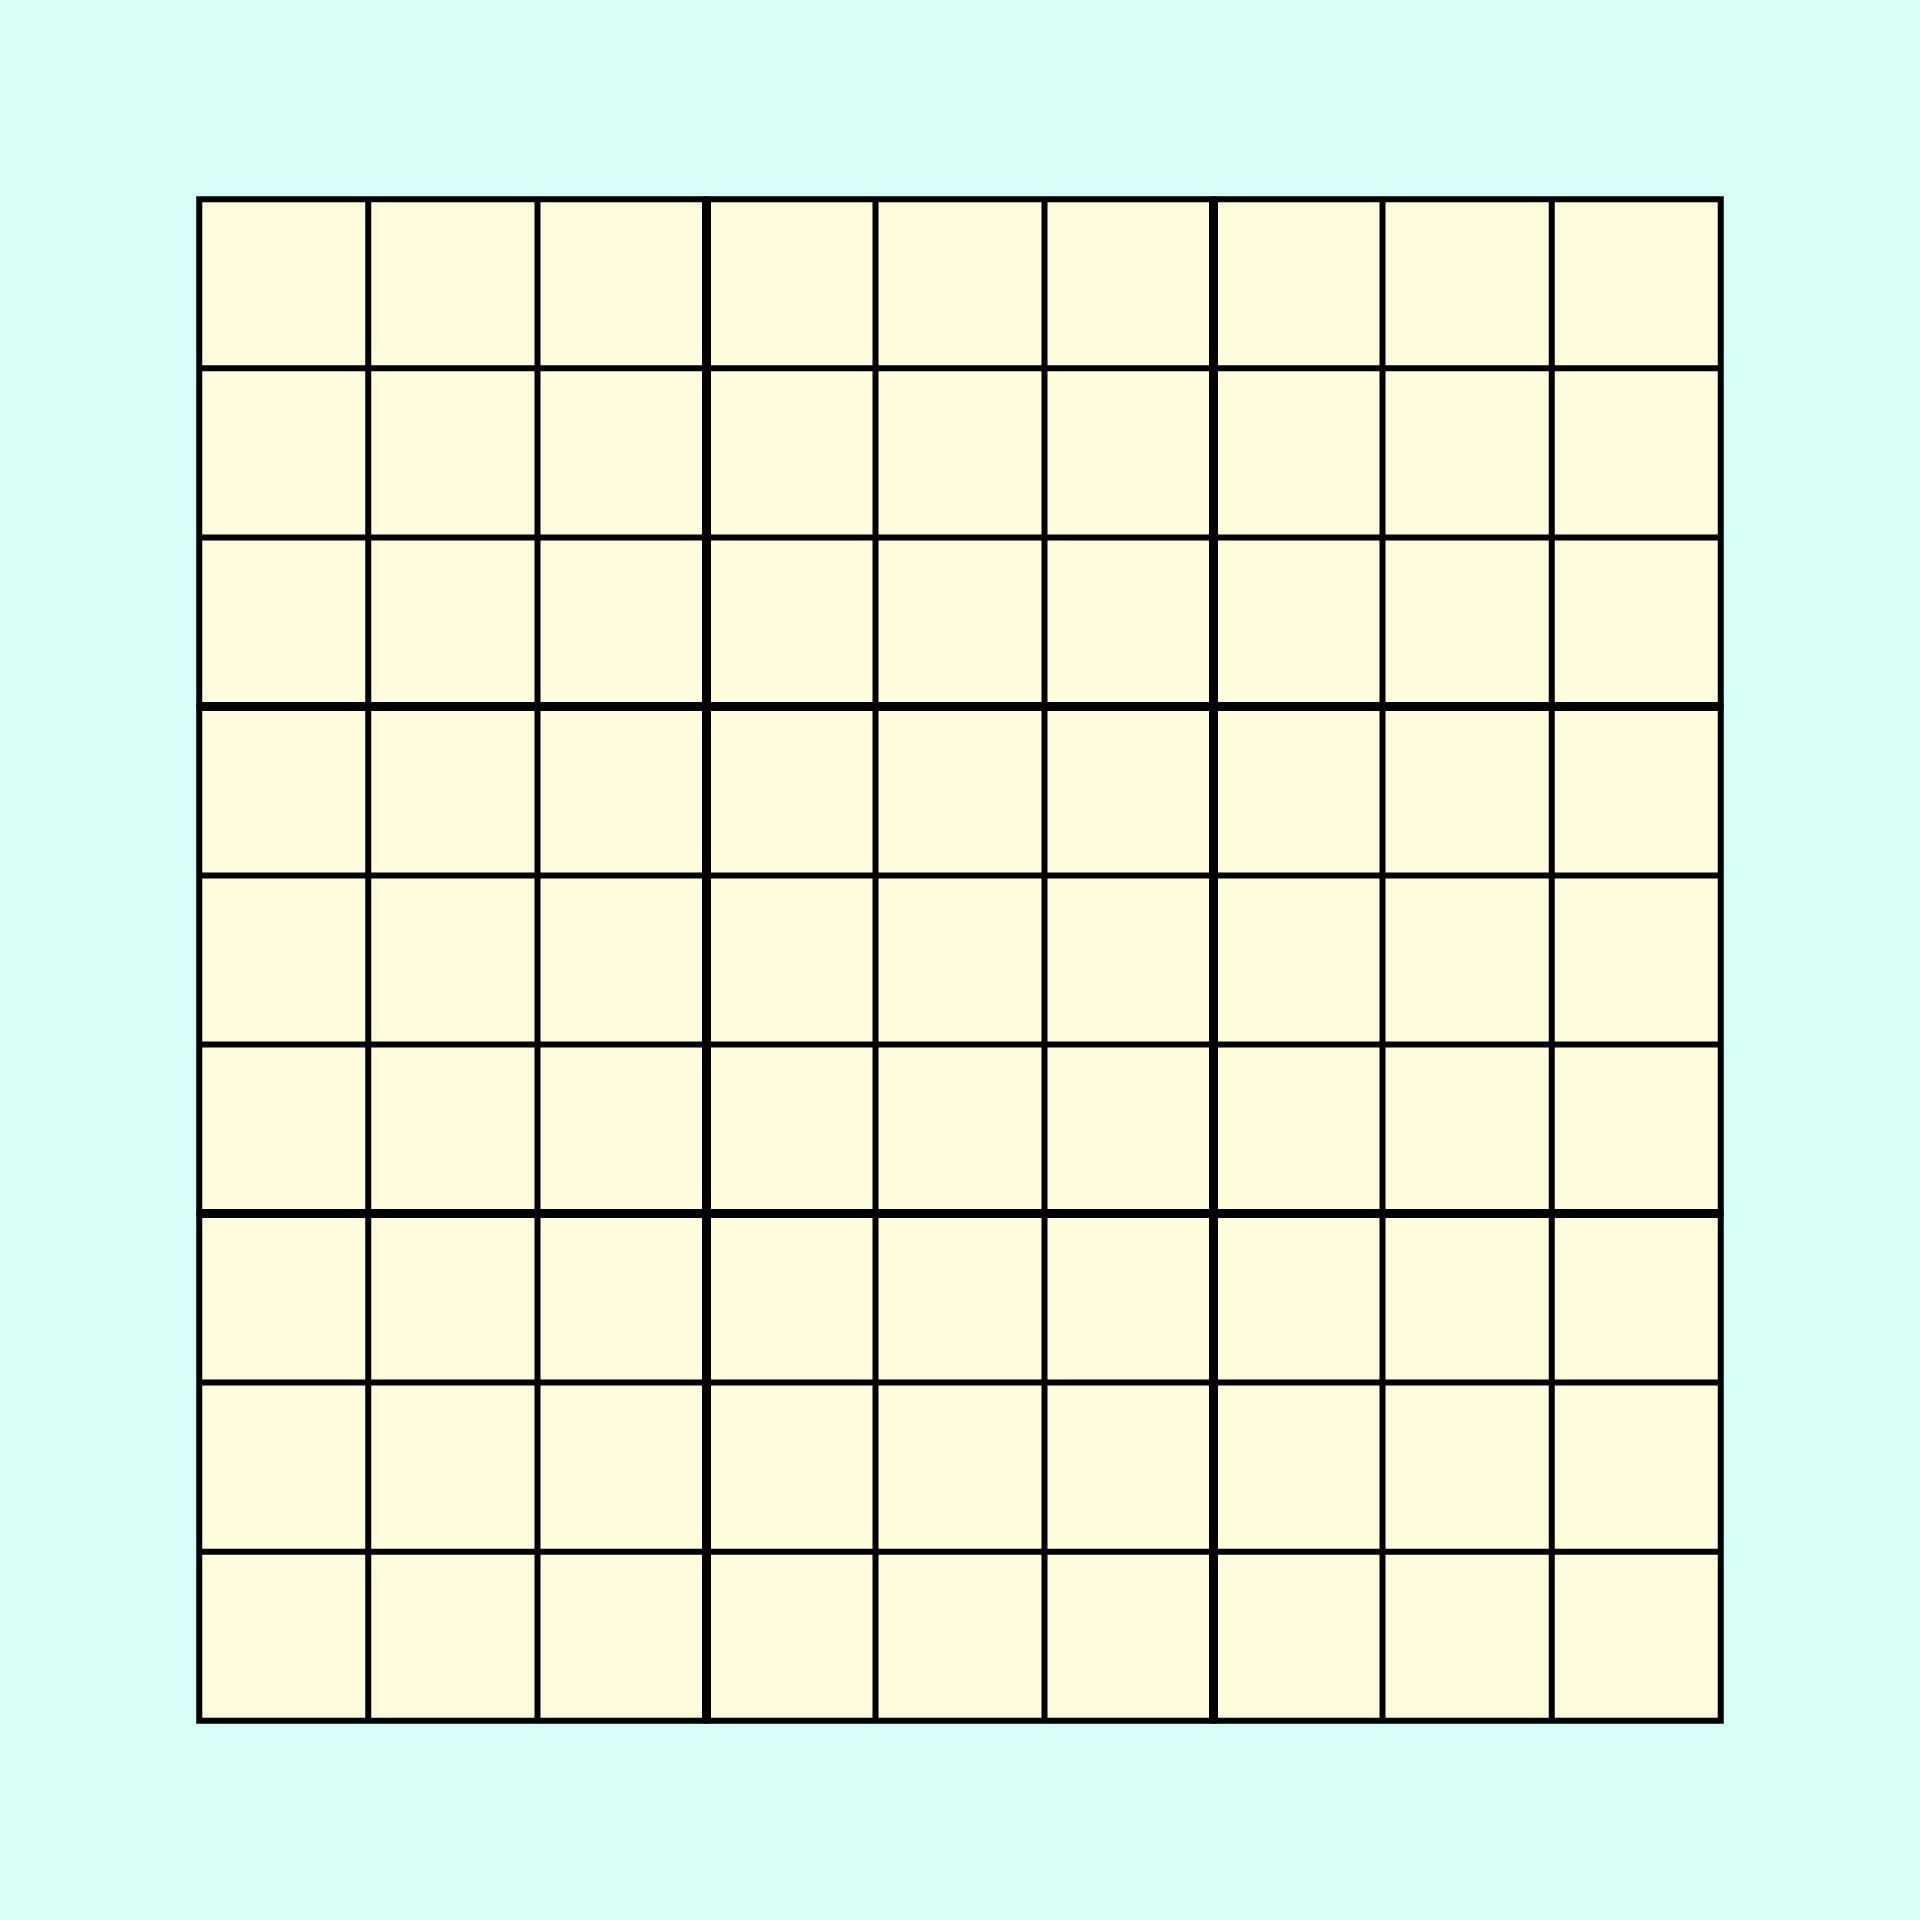 Printable Sudoku Puzzle Blank Grids Four Up